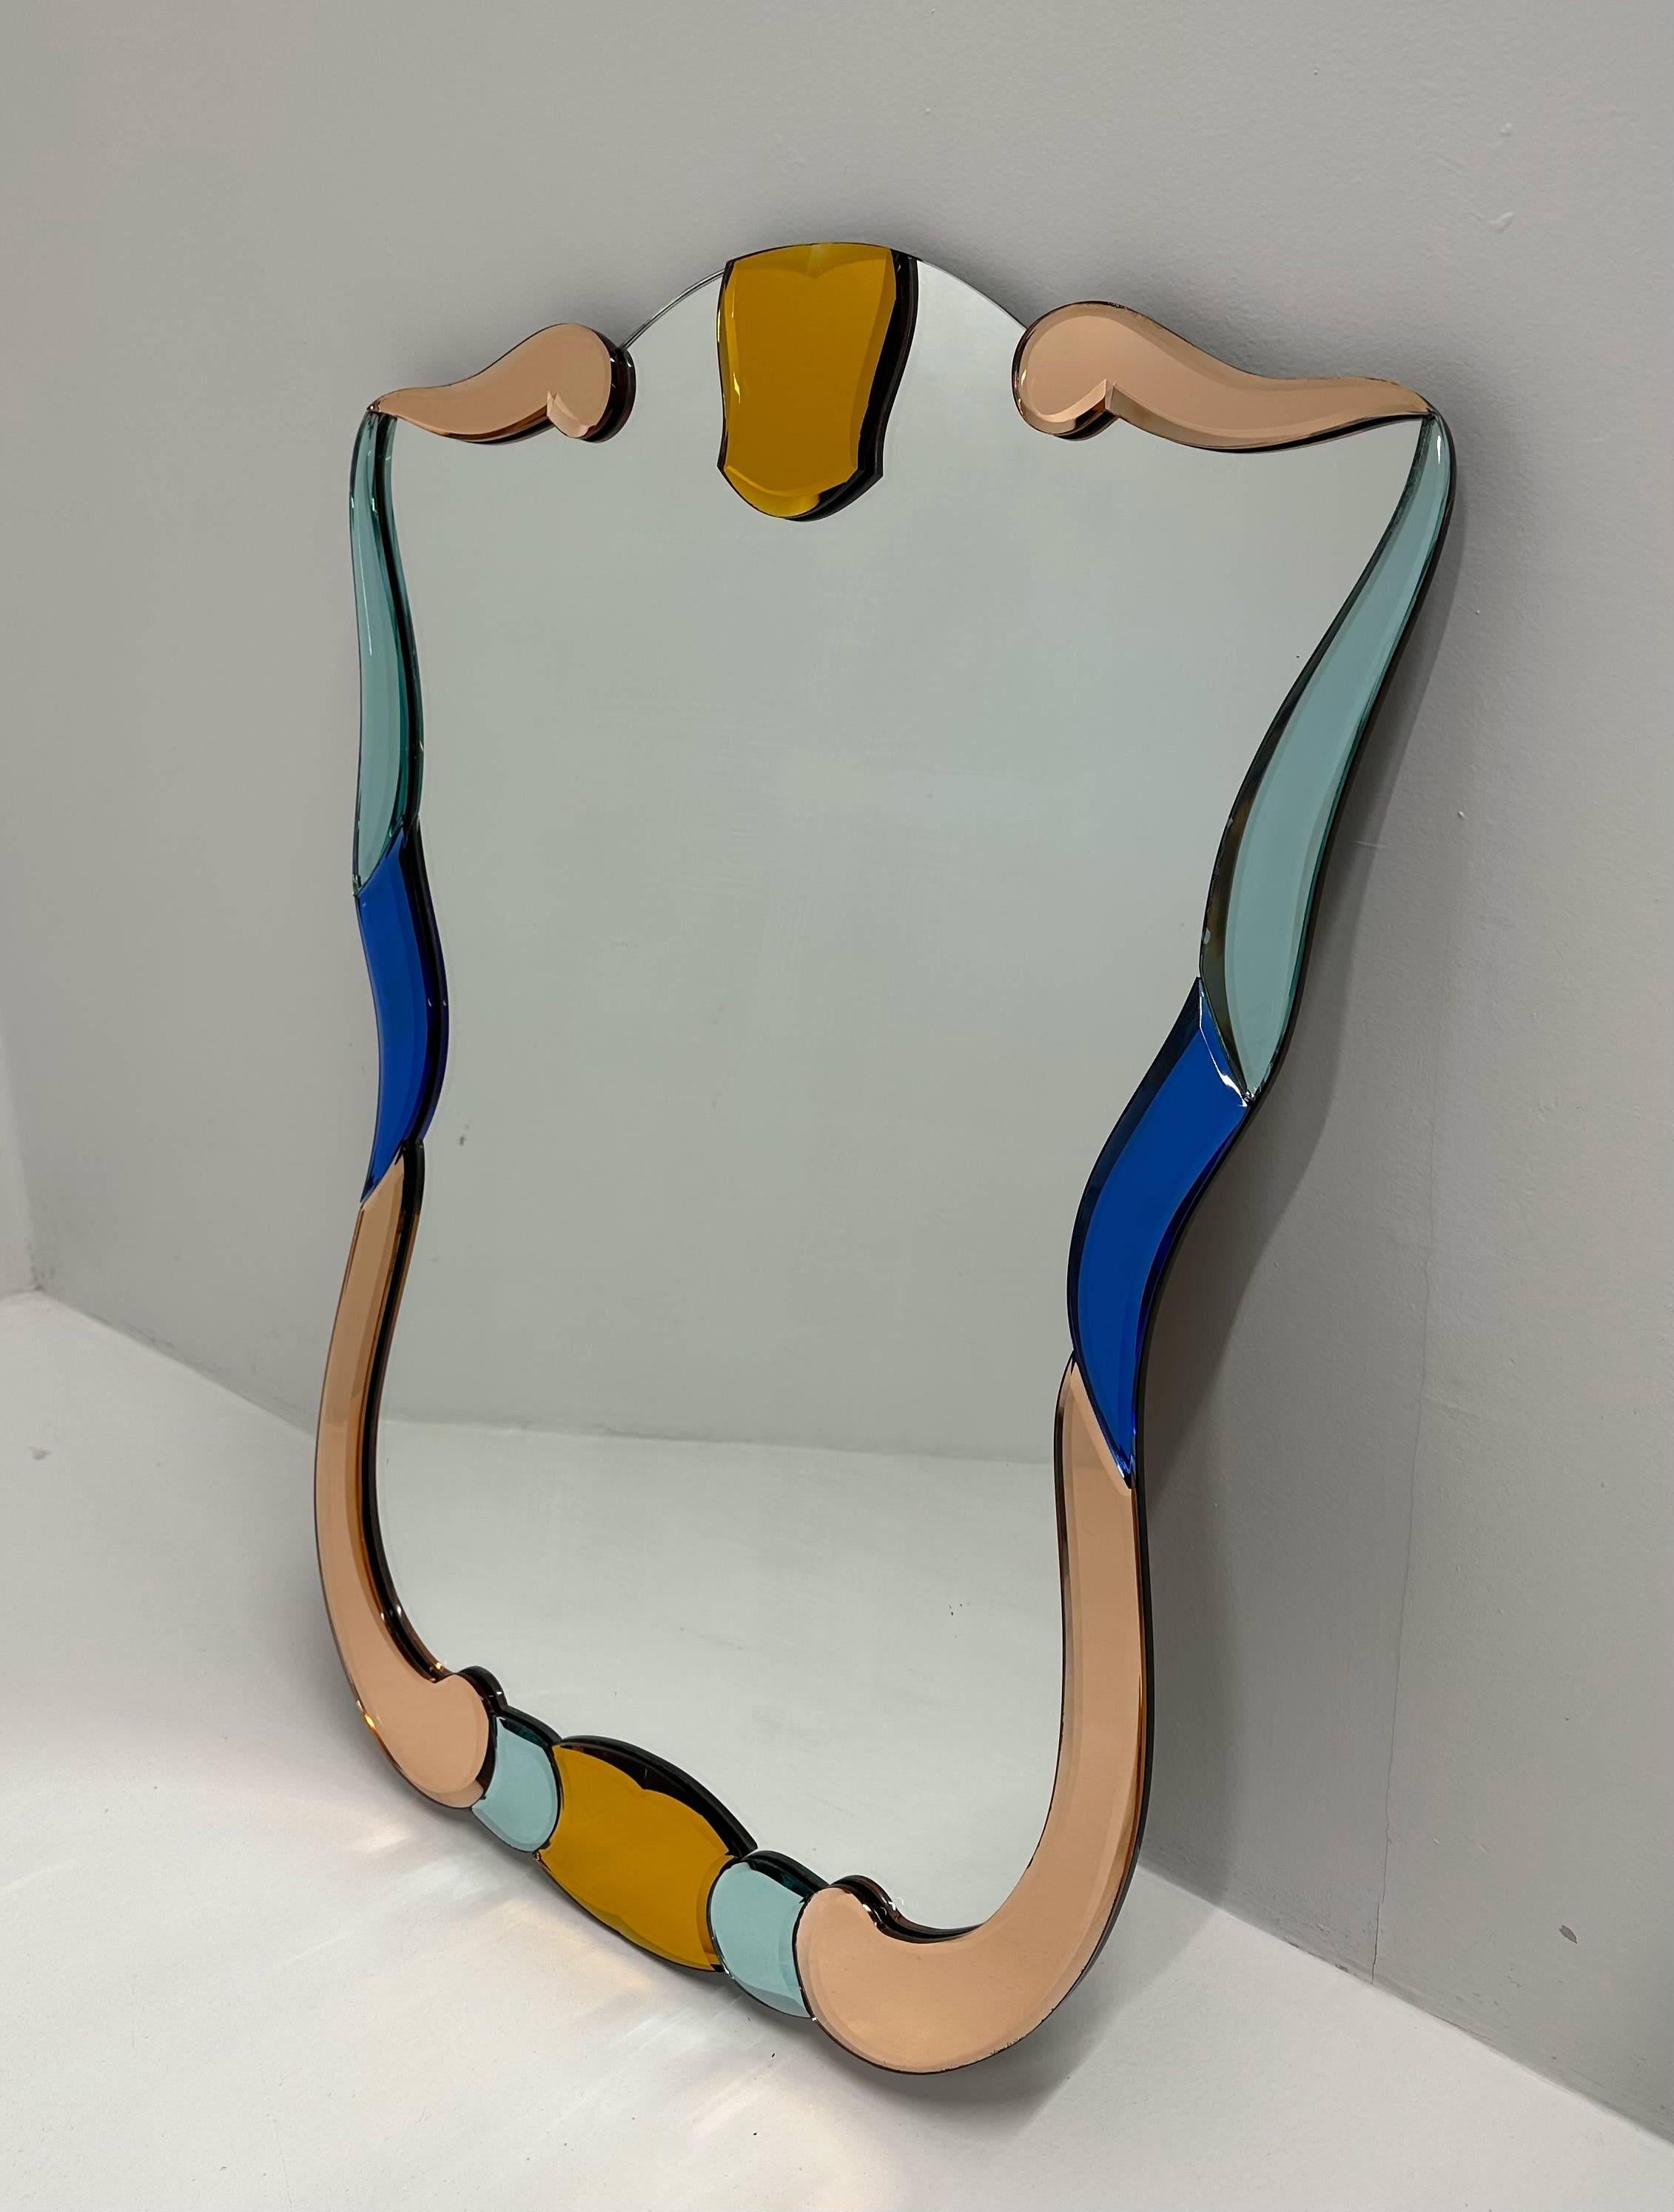 This elegant mirror was produced in Italy, more precisely in Murano (Near Venice, it is the world's capital of glass crafting) in the 1980s. The central mirror is framed by pastel colored Murano Mirrors in different shapes. 
